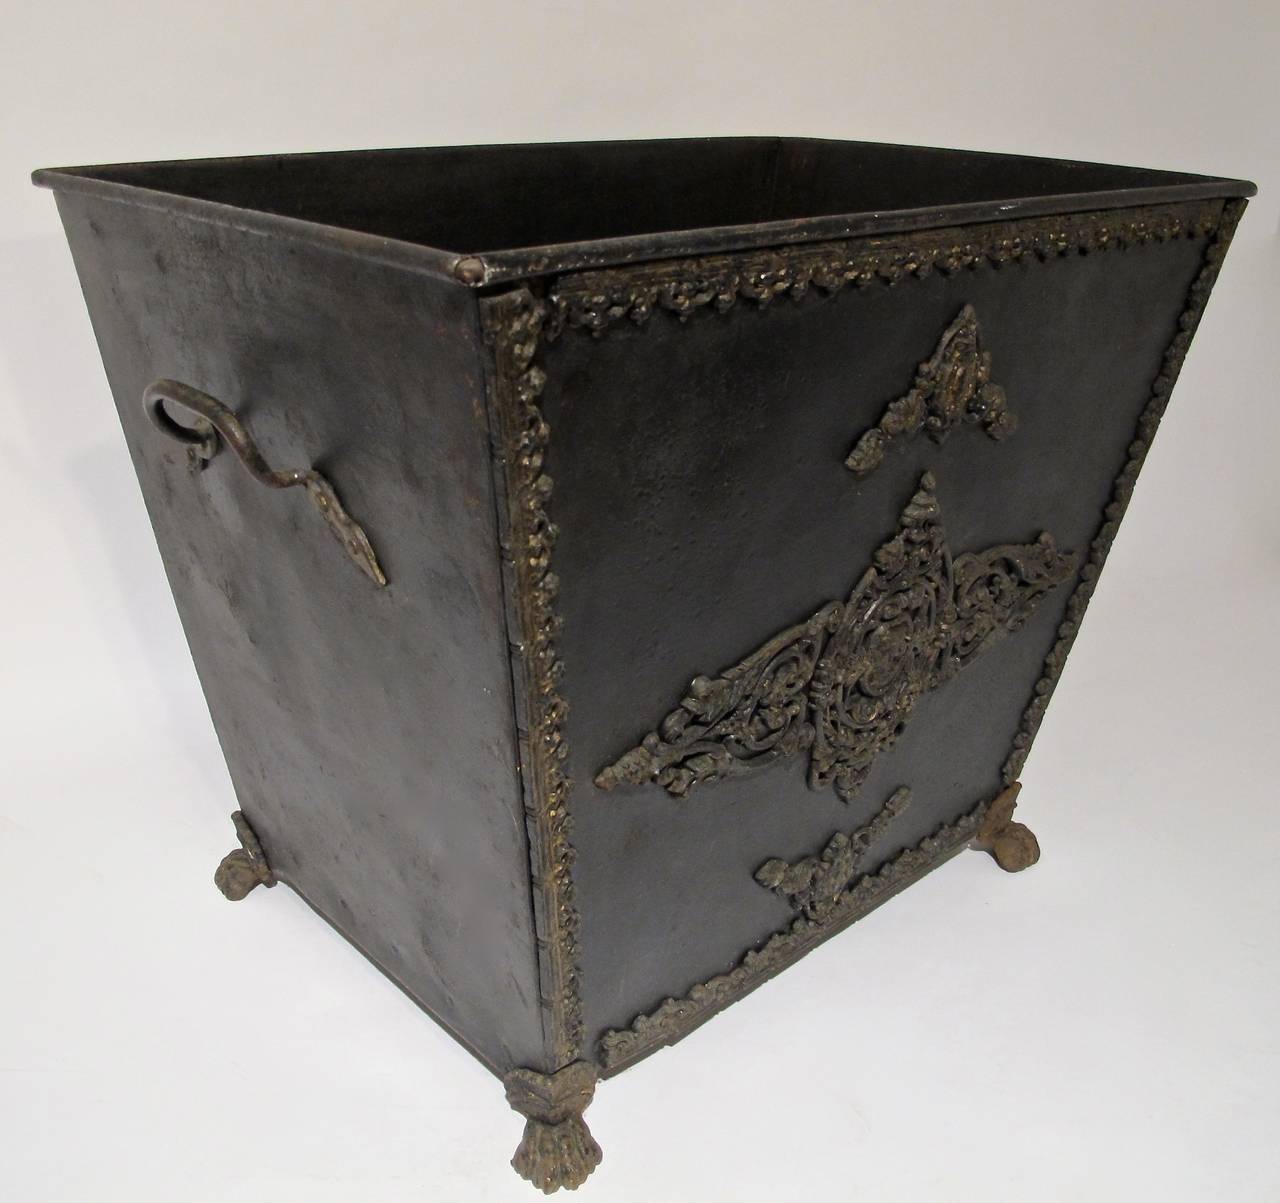 A very large storage bin, painted steel with brass mounts and decoration.